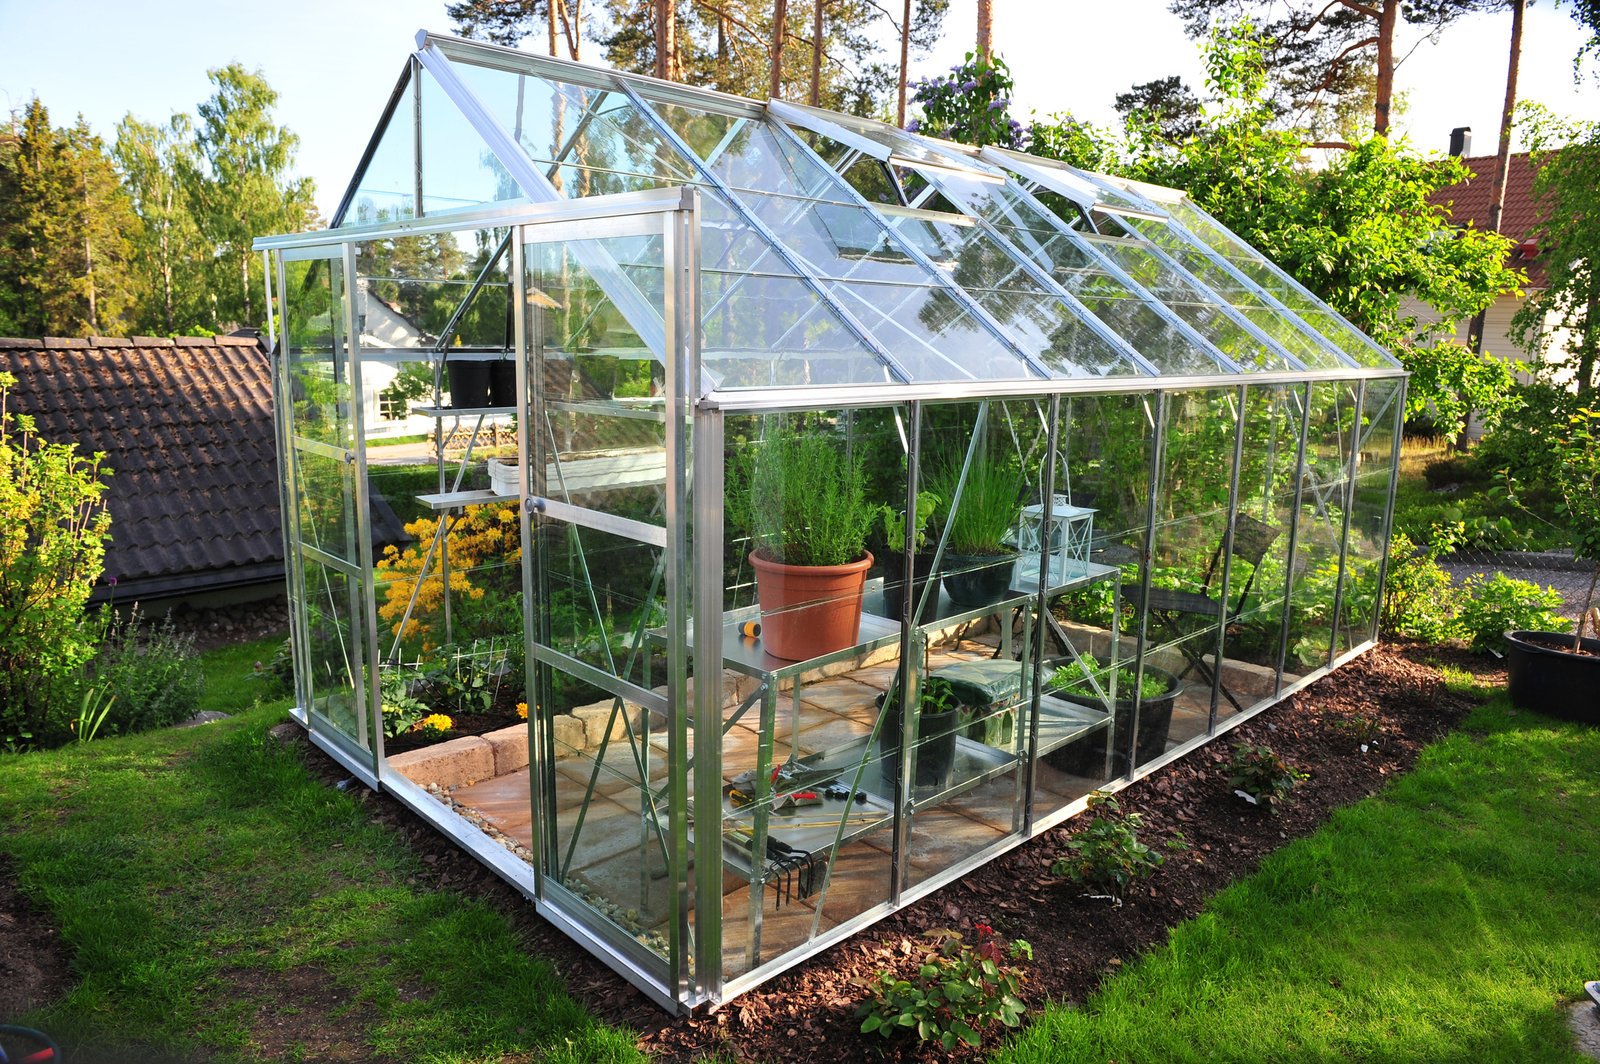 5 Tips for Choosing the Perfect Glasshouse for Your Garden